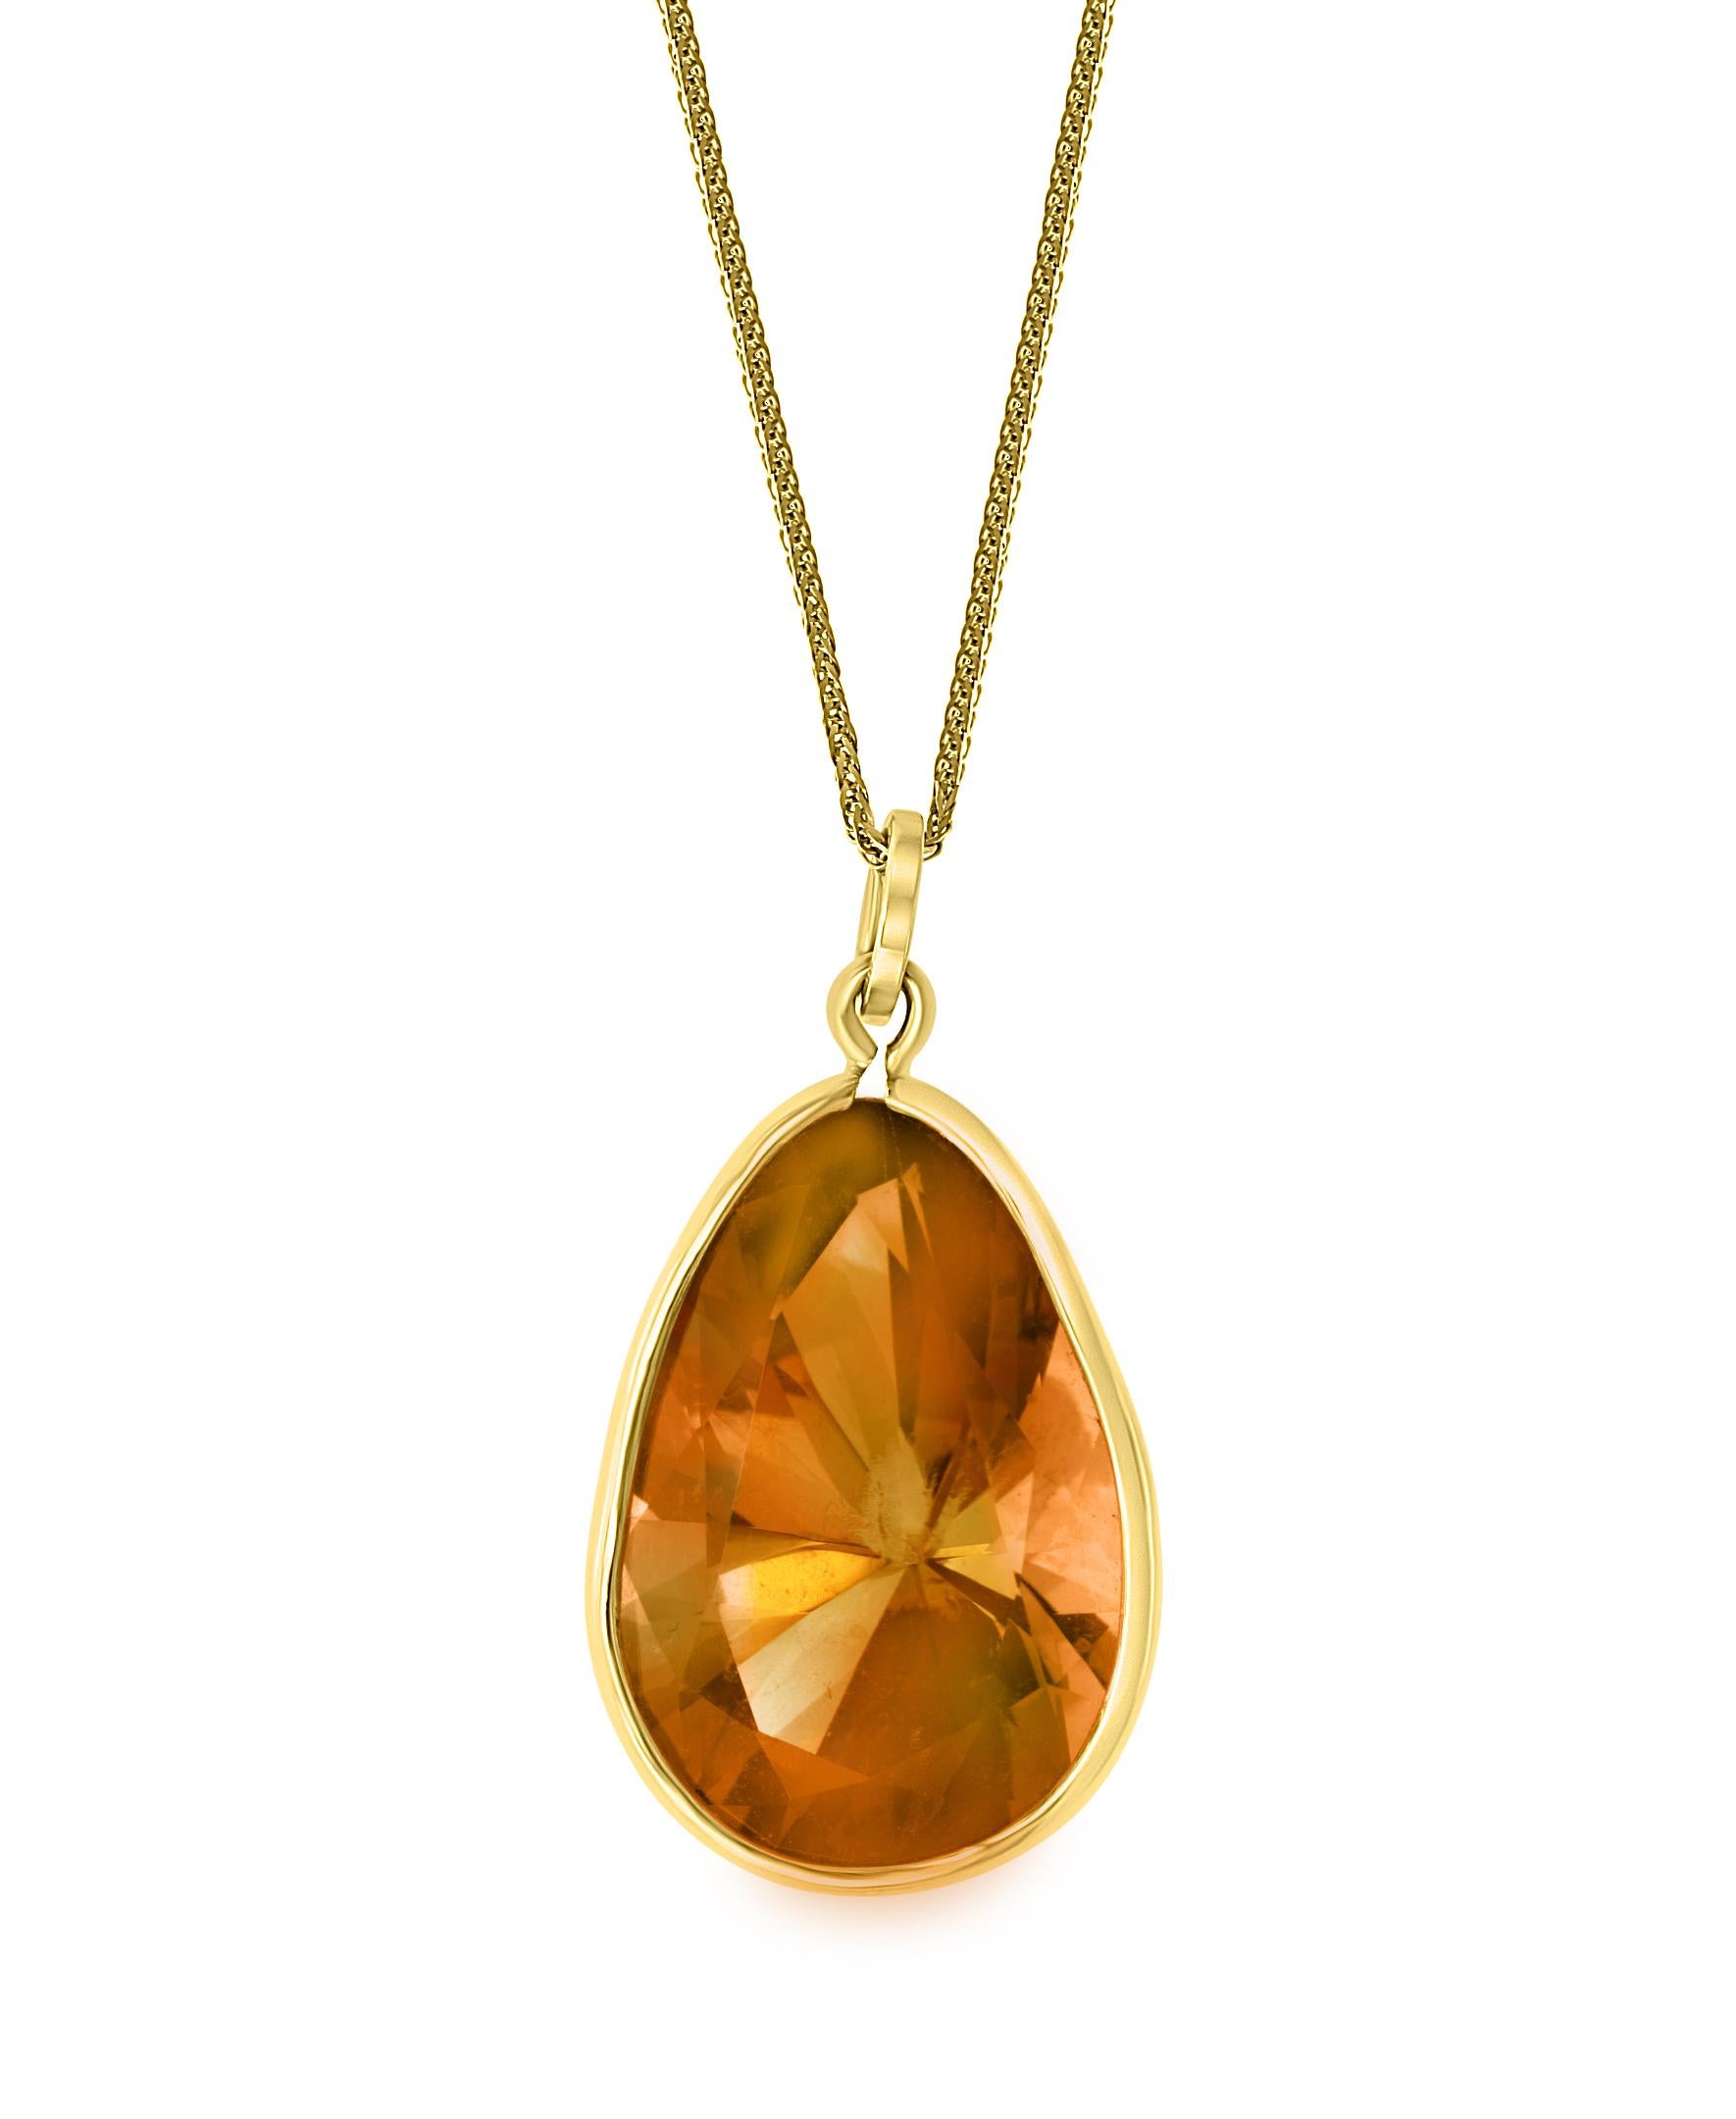 Approximately 19 Carat Pear shape Citrine Pendent/Necklace 14 Karat  Yellow Gold with Chain
This Colombian Pendant necklace is a eye-catching pendant necklace . It features a large  fine  19 ct  Pear shape Citrine  set in  14 karat  Yellow Gold.